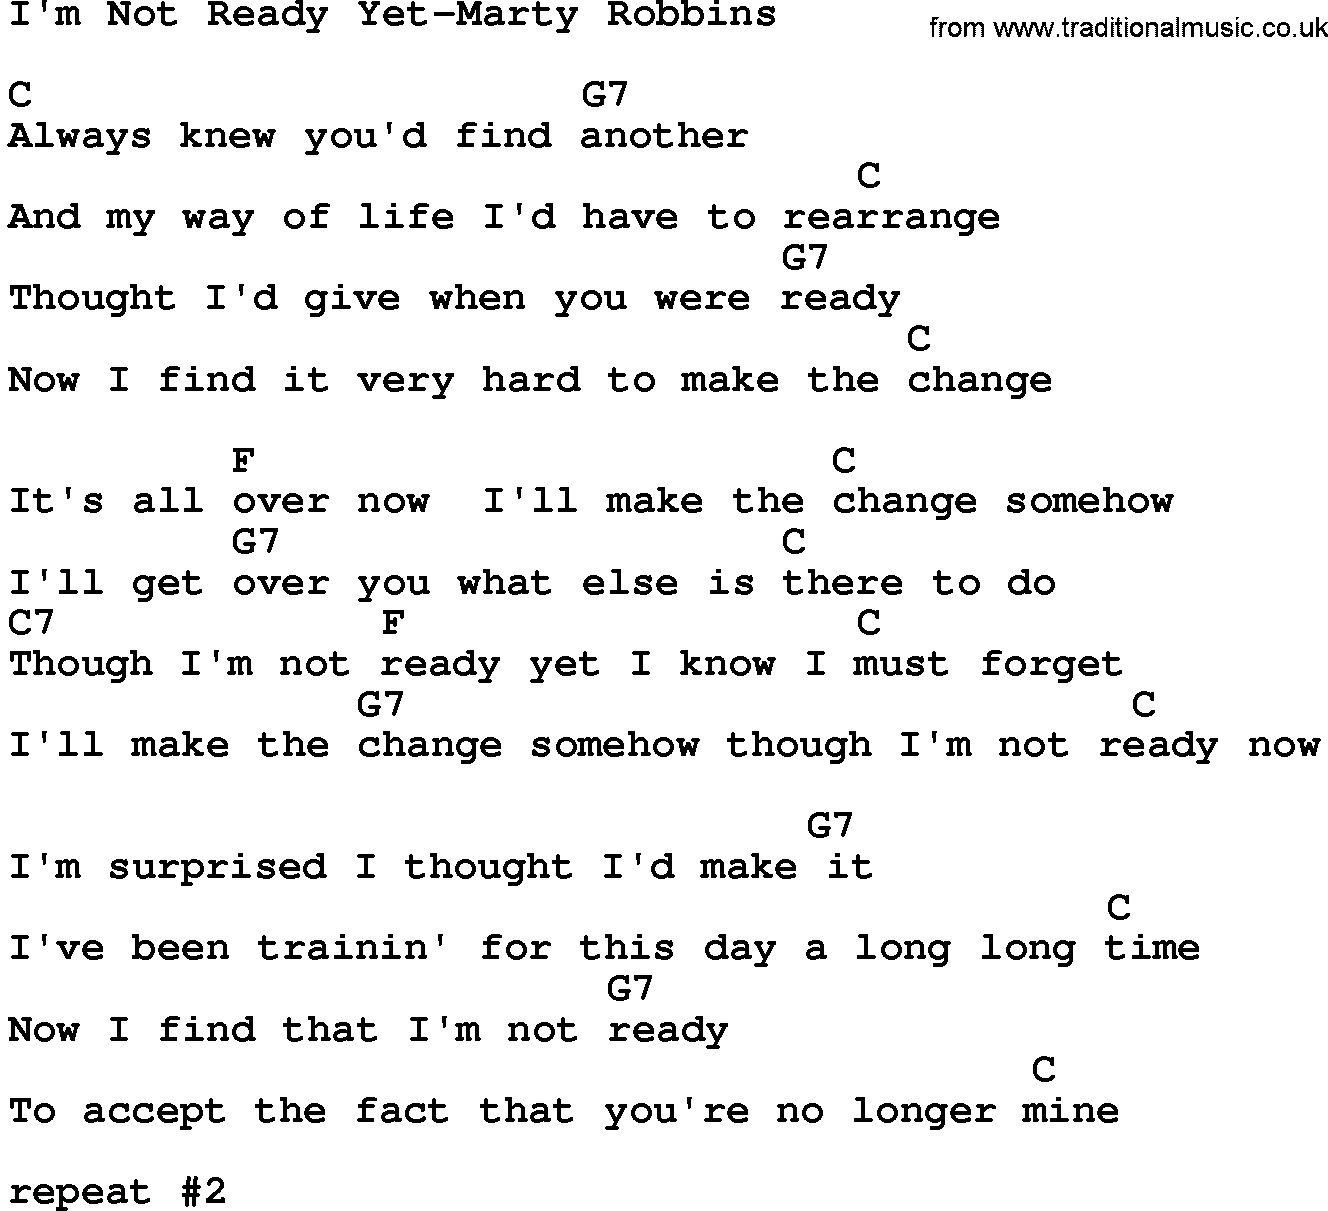 Country music song: I'm Not Ready Yet-Marty Robbins lyrics and chords